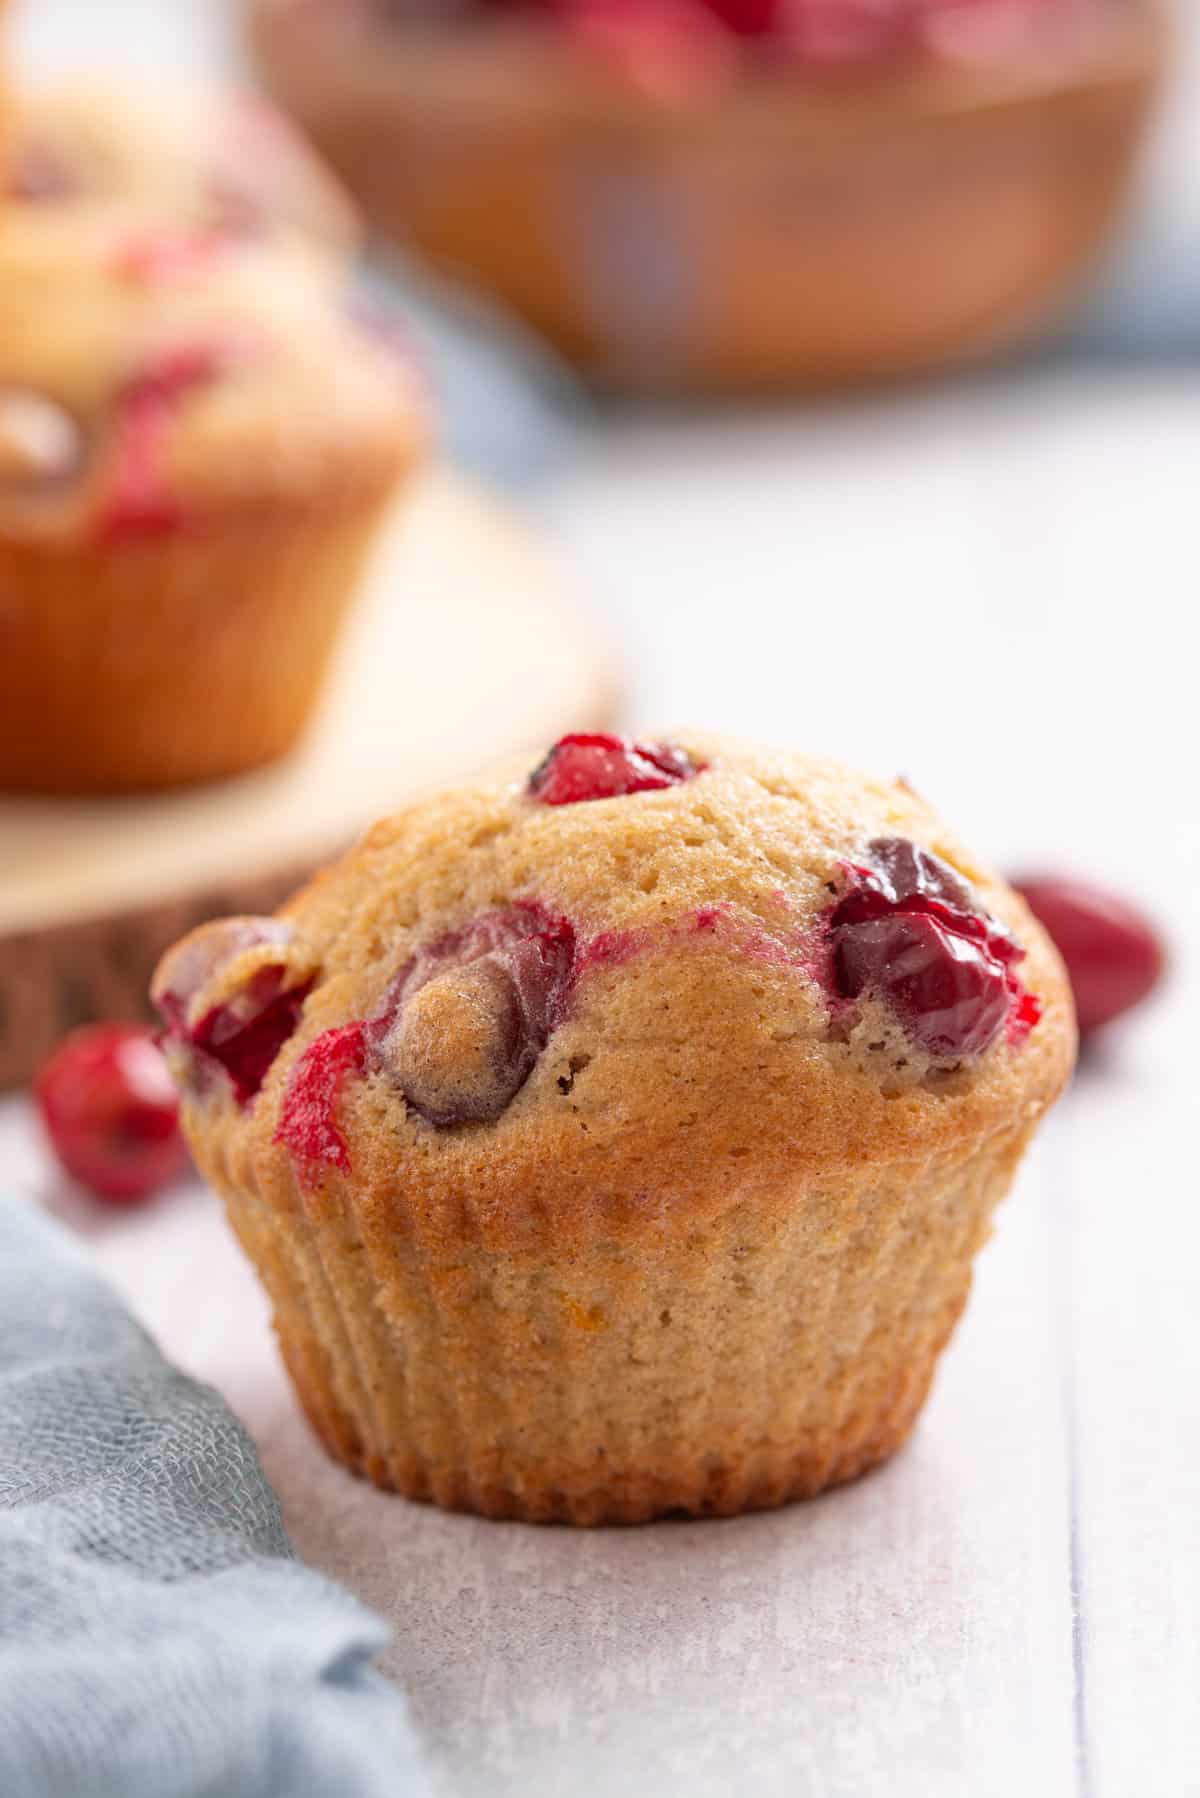 A close up image of a single cranberry orange muffin on a table.